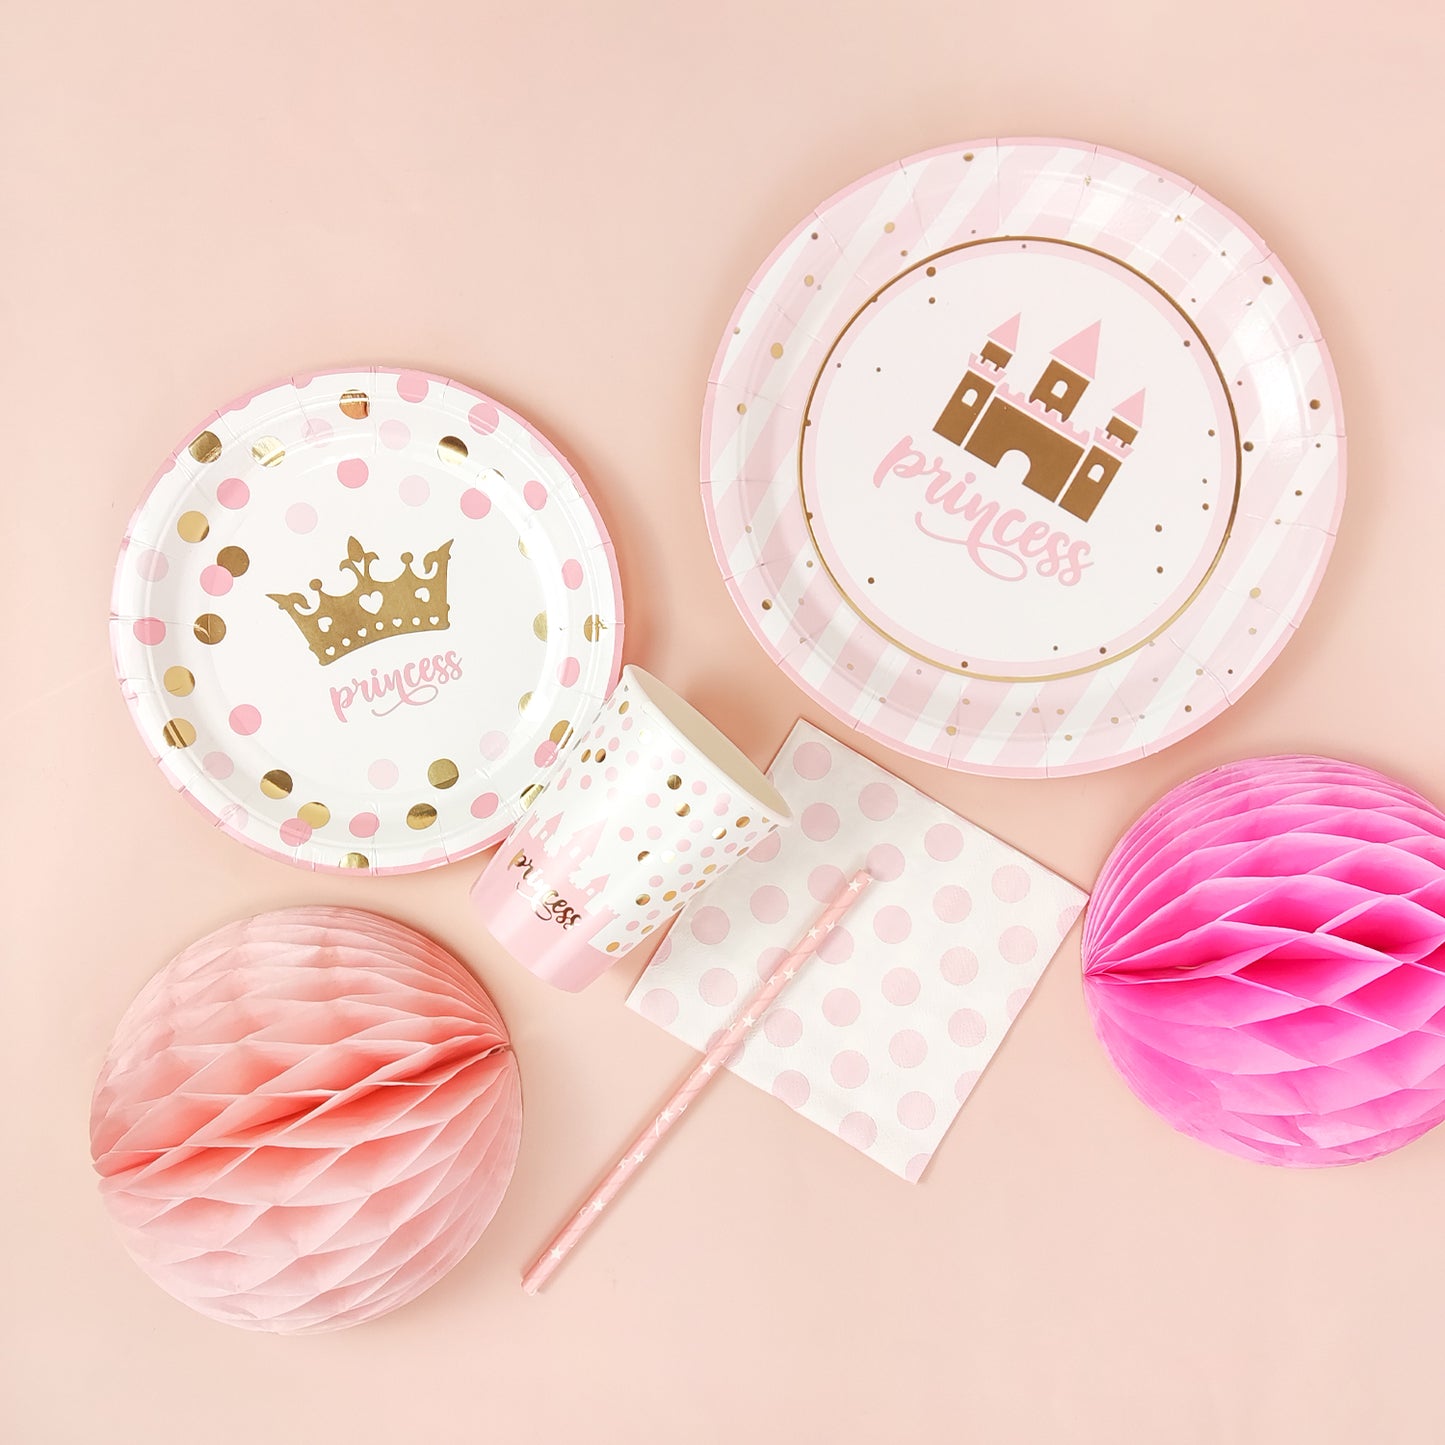 Princess Design Disposable Tableware Set Party Plates Cups Napkins for Girl's Party Decoration